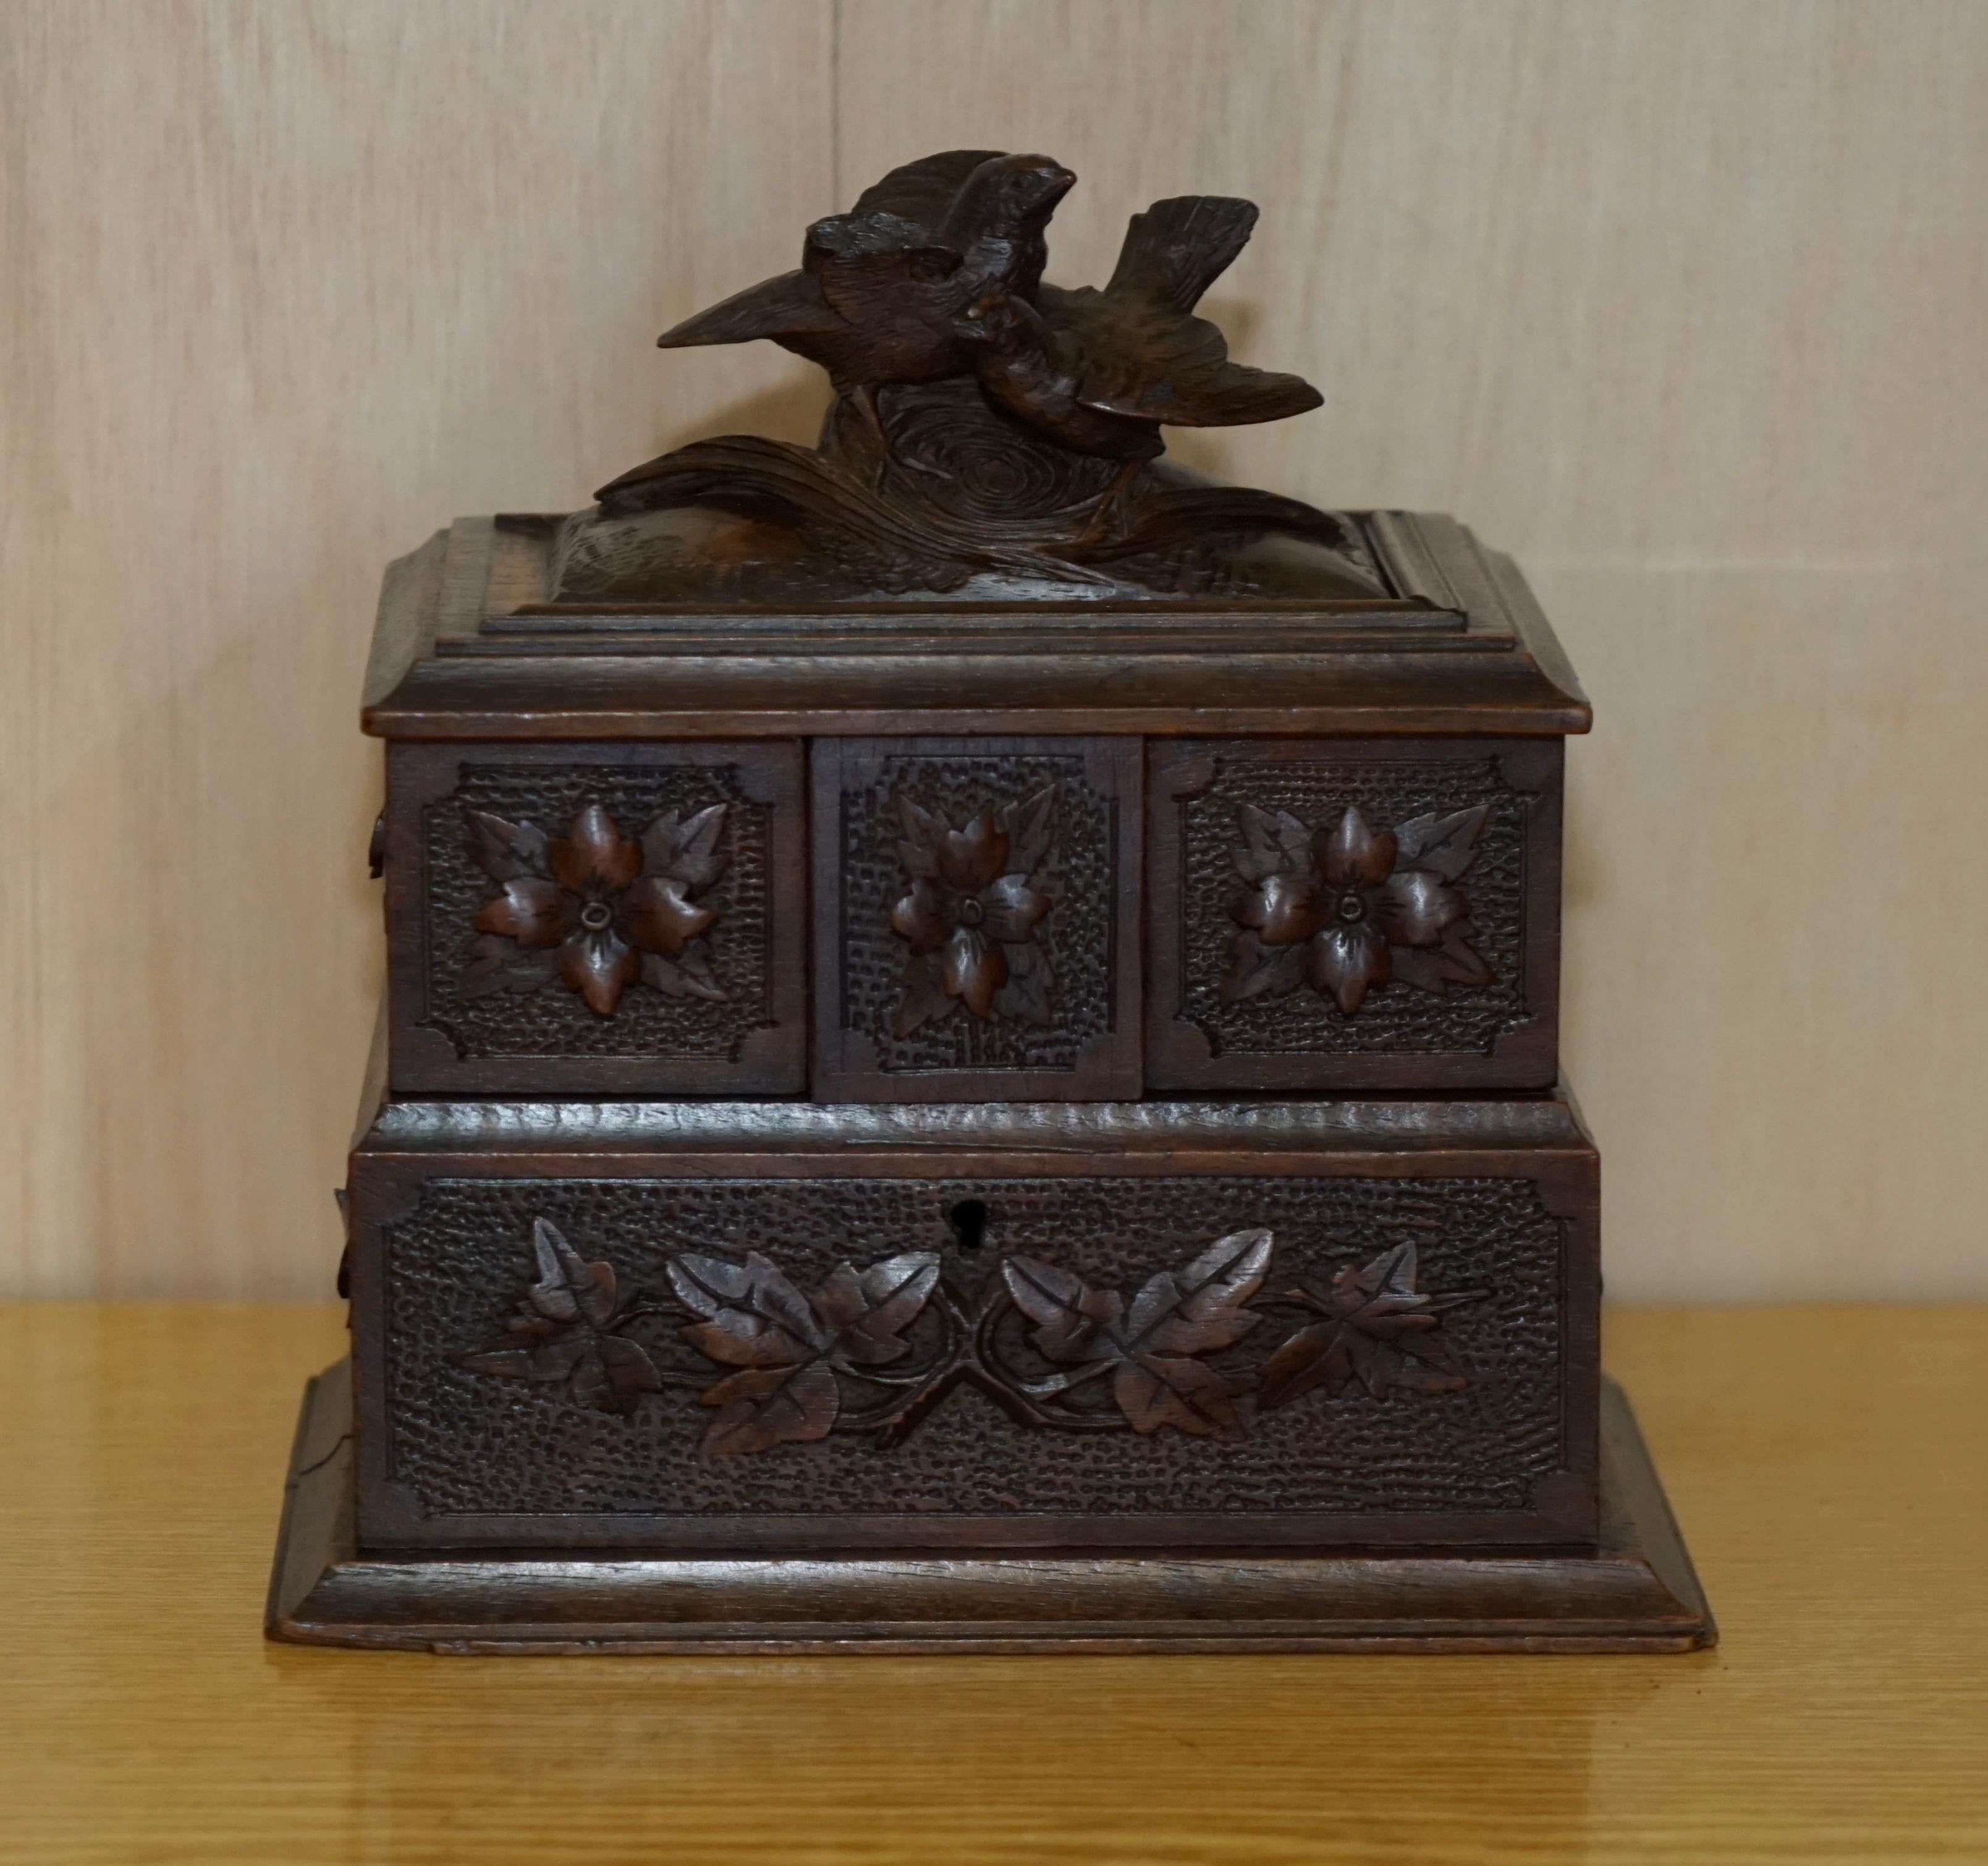 We are is delighted to offer for sale this rather lovely antique original circa 1880 black forest wood jewellery box

A very good looking and well made piece, it is hand carved all over with birds and floral decorations, the insides are blue silk